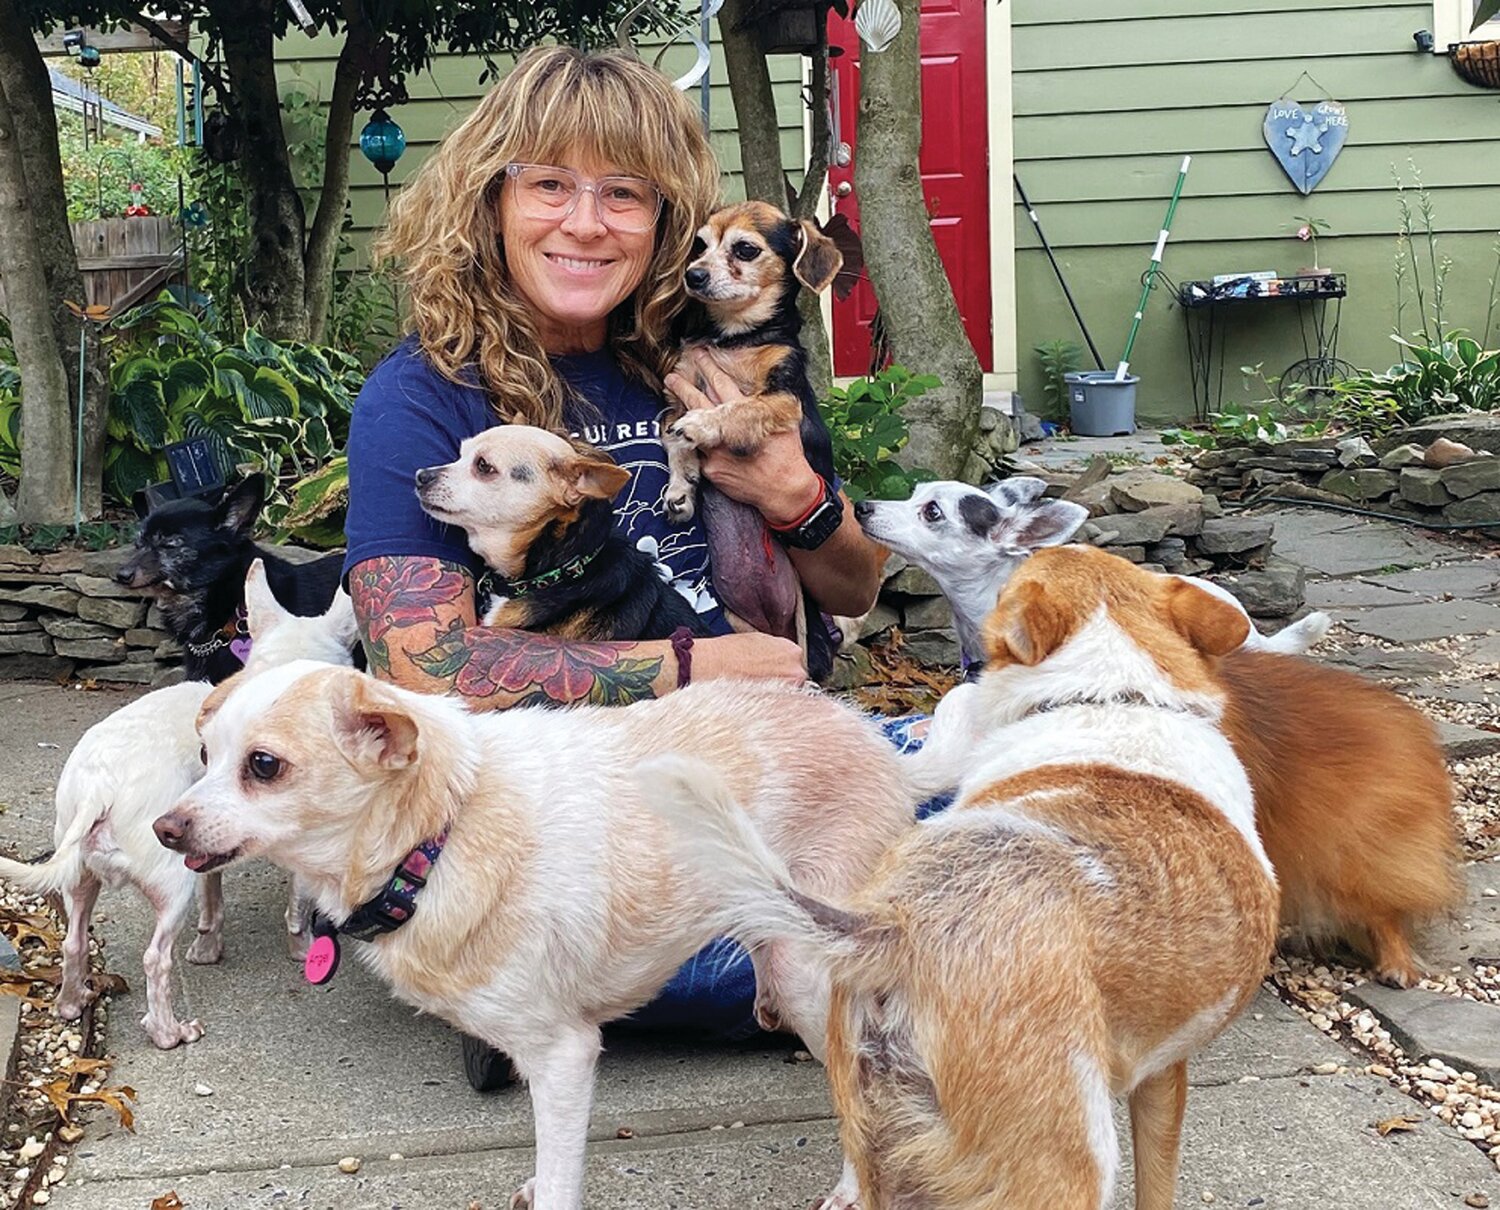 “Fixer-uppers,” rescued senior dogs, live out their golden years in comfort at Happy Tails Rescue Retirement Home in Morrisville, run by Stacey Herrick.